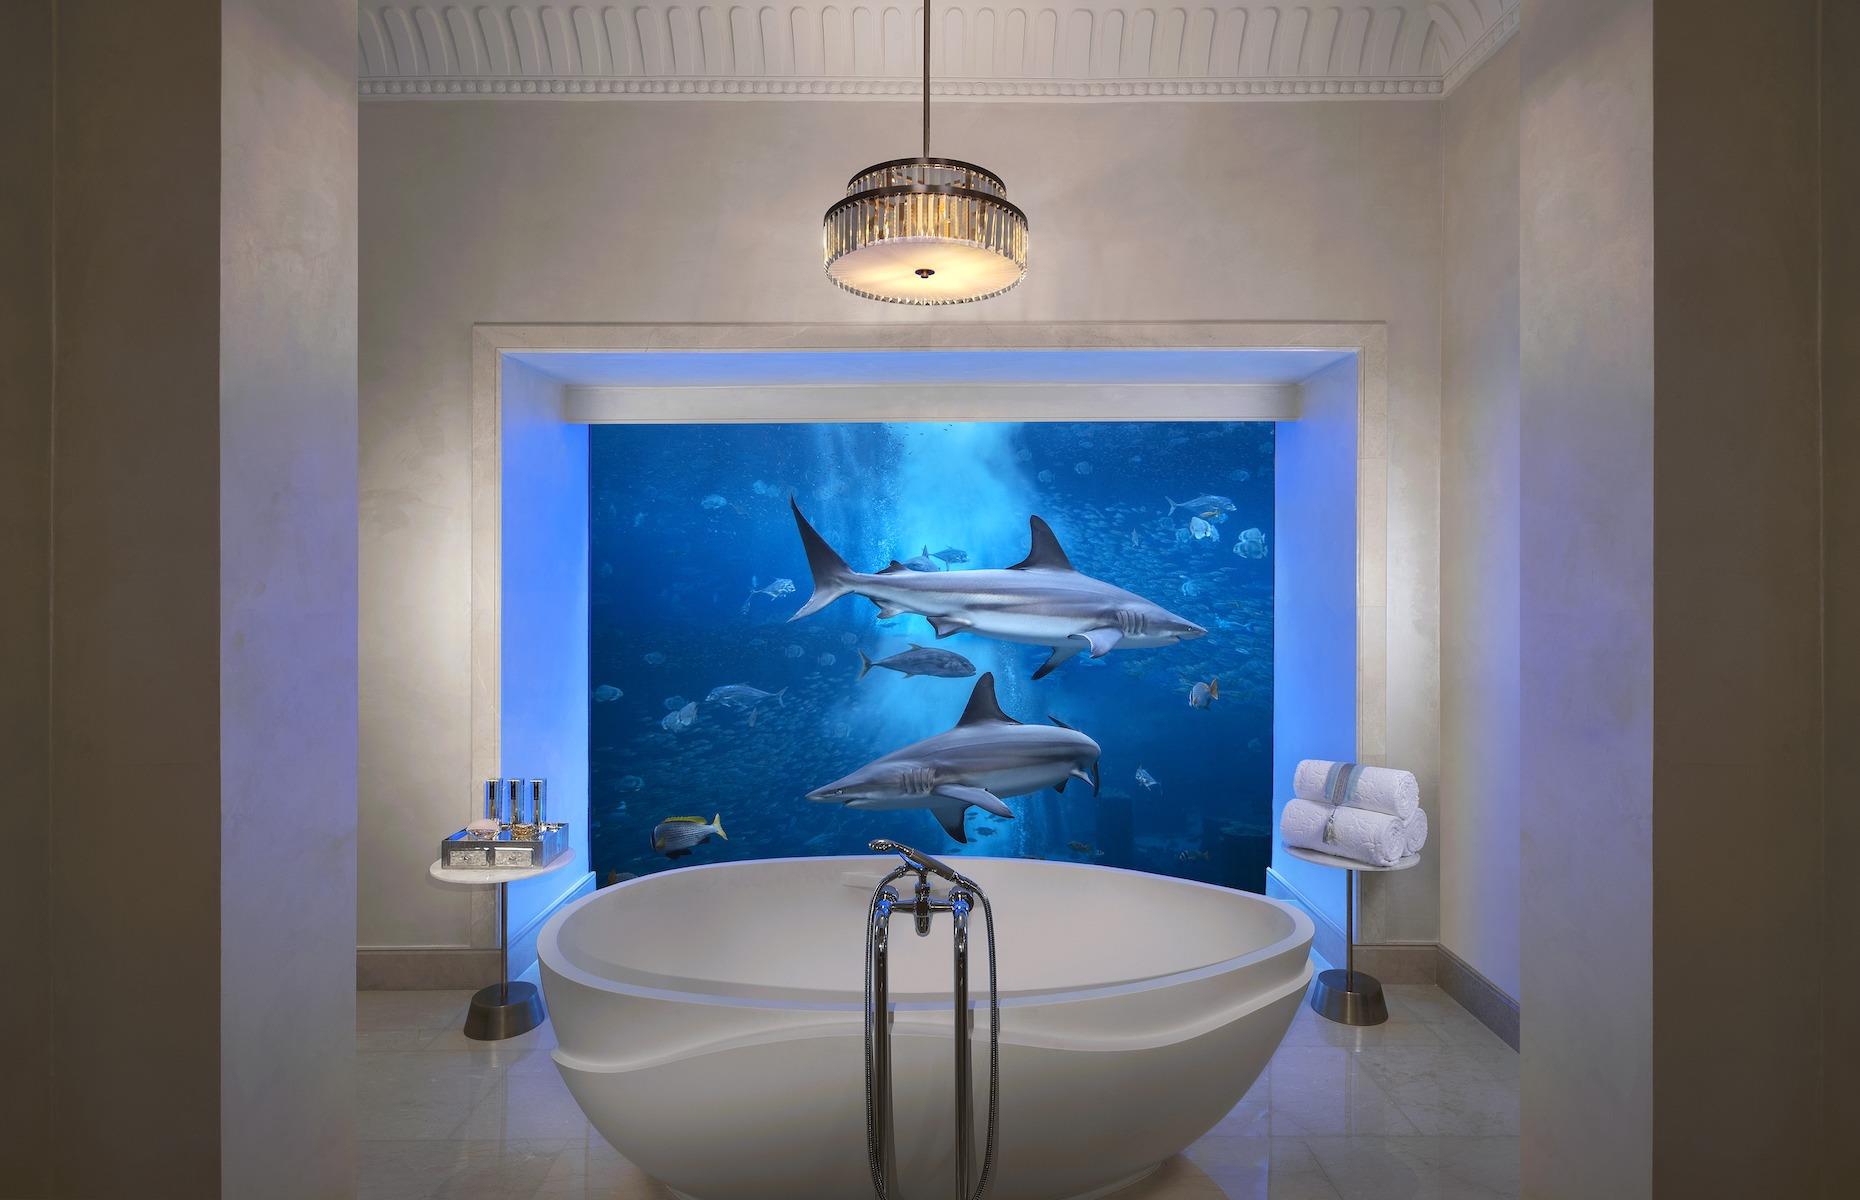 <p>The twin underwater suites – which come with a private butler – have above-ground lounges where guests can gaze out at the lagoon's lapping water. Down below, the bedrooms and bathrooms have soaring floor-to-ceiling windows onto the private marine oasis, allowing guests to stare at the entrancing scene as they wallow in the bed or marble bath. For those wishing to get even closer to their colourful neighbours, the suite includes entry into the aquarium which can also arrange tank dives.</p>  <p><a href="https://www.loveexploring.com/galleries/90158/99-of-the-worlds-most-amazing-bucketlist-experiences?page=1"><strong>Now check out 99 of the world's most amazing bucket list experiences</strong></a></p>